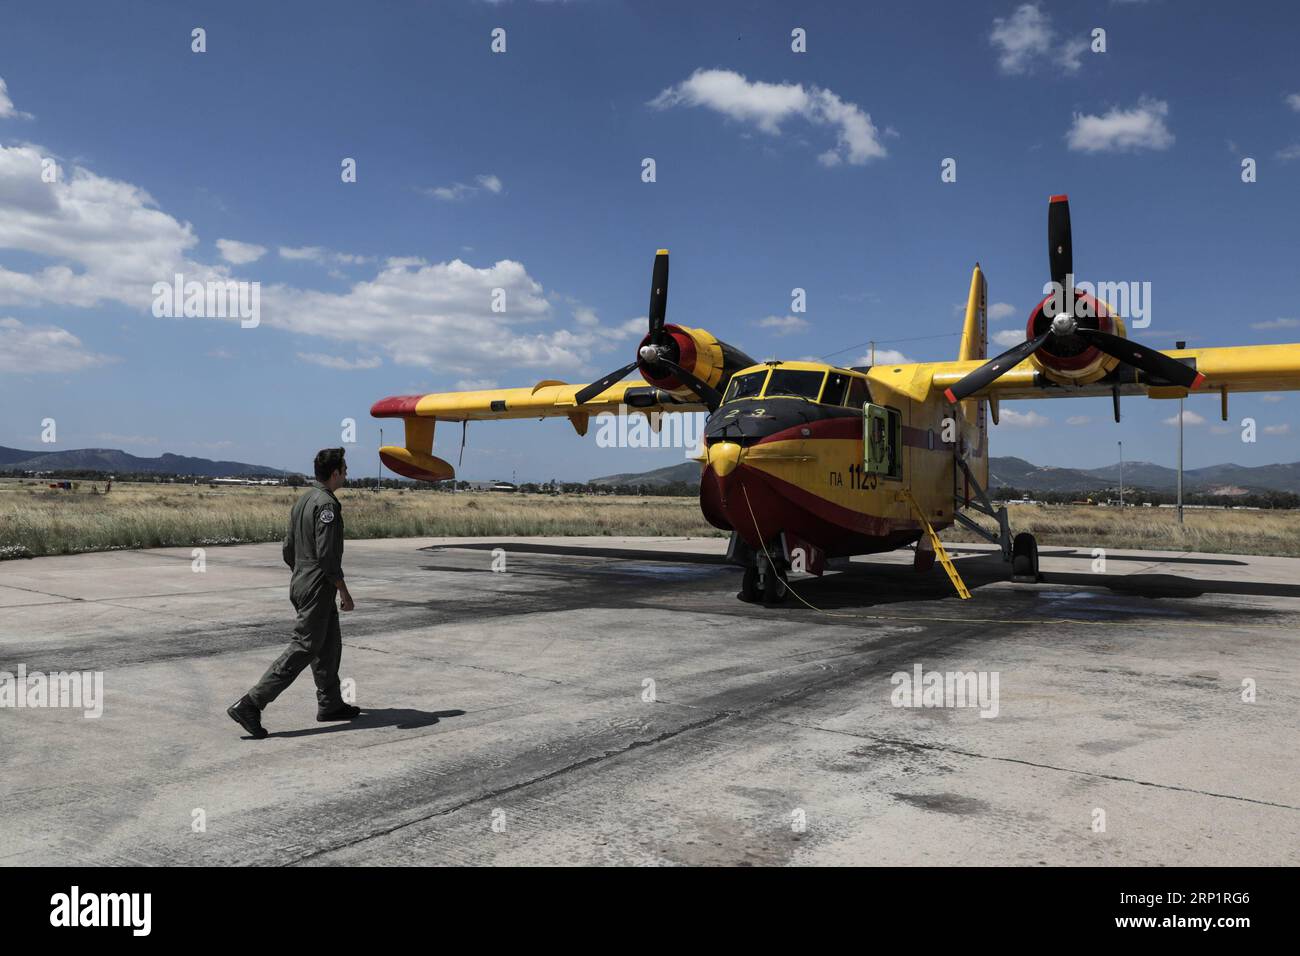 (180721) -- ATHENS, July 21, 2018 -- Pilot Georgios Apostolou walks to a Canadair firefighting aircraft at Elefsina Air Base, Athens, Greece, on July 20, 2018. The 355 Tactical Transport Squadron was established in 1947 to fight wildfires. ) (zcc) GREECE-ATHENS-FIREFIGHTING SQUADRON LefterisxPartsalis PUBLICATIONxNOTxINxCHN Stock Photo